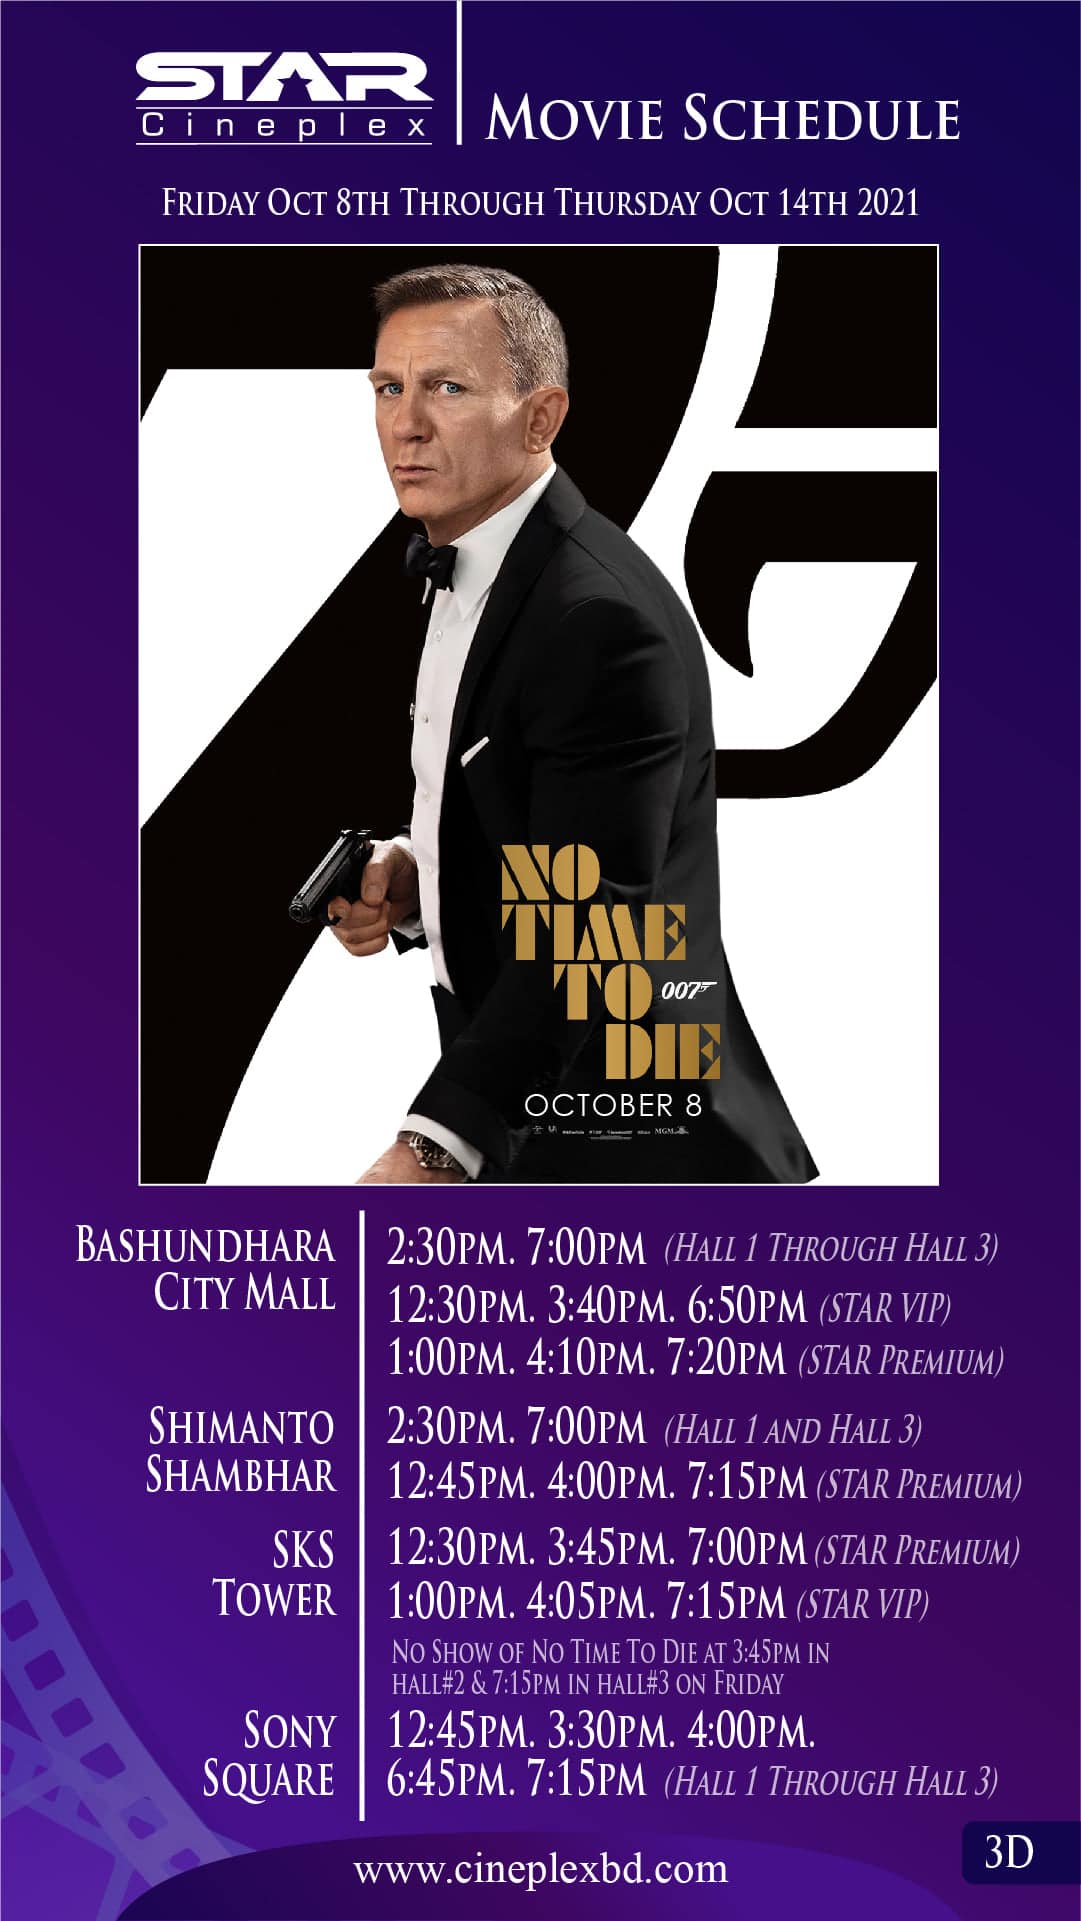 James Bond in Dhaka! Star Cineplex's surprise on the completion of 17 years!